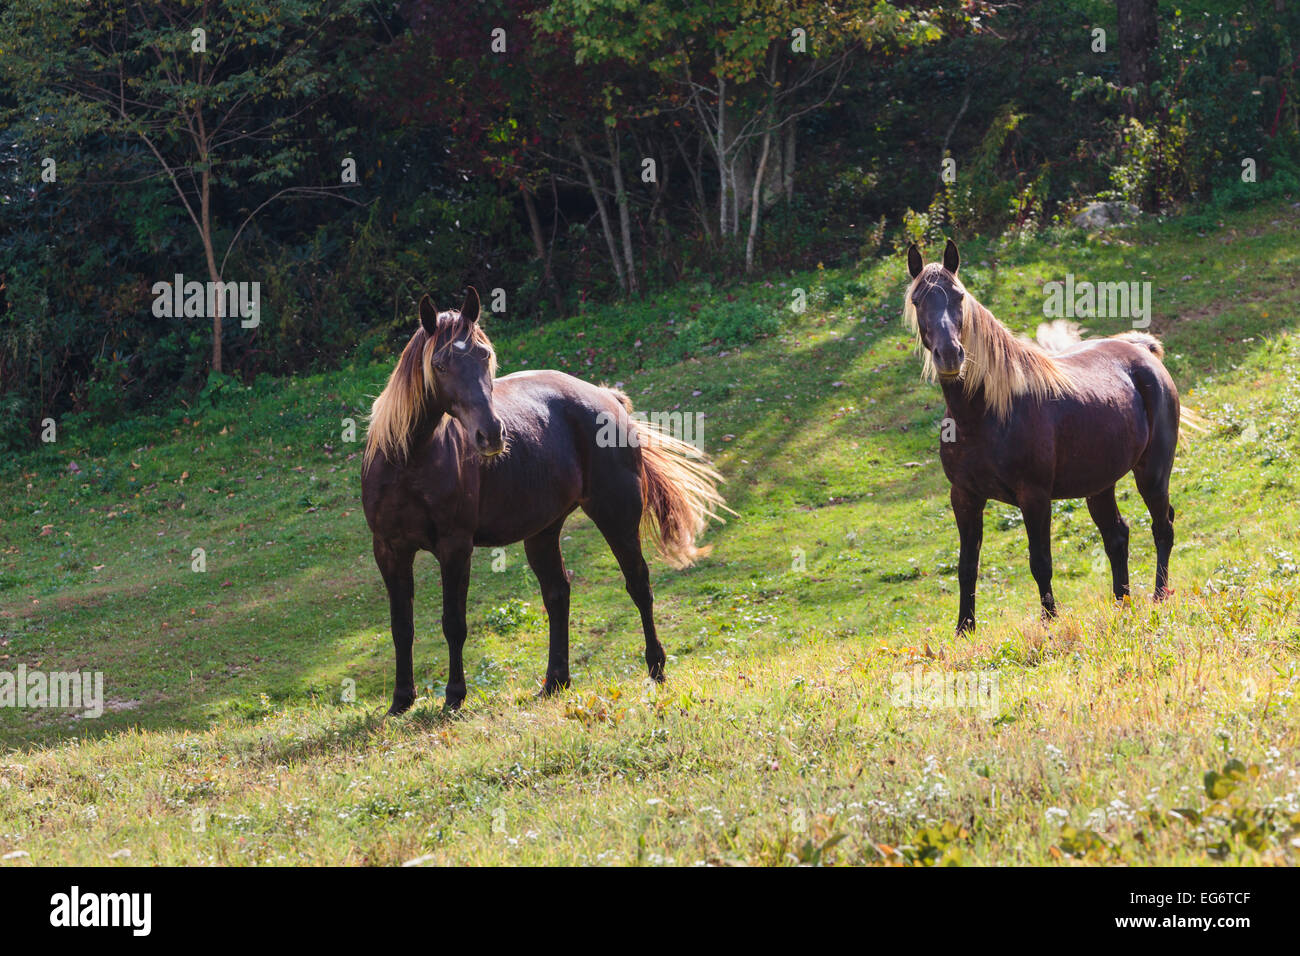 Two brown horses (Equus ferus caballus) stare curiously at the photographer from their field. Stock Photo